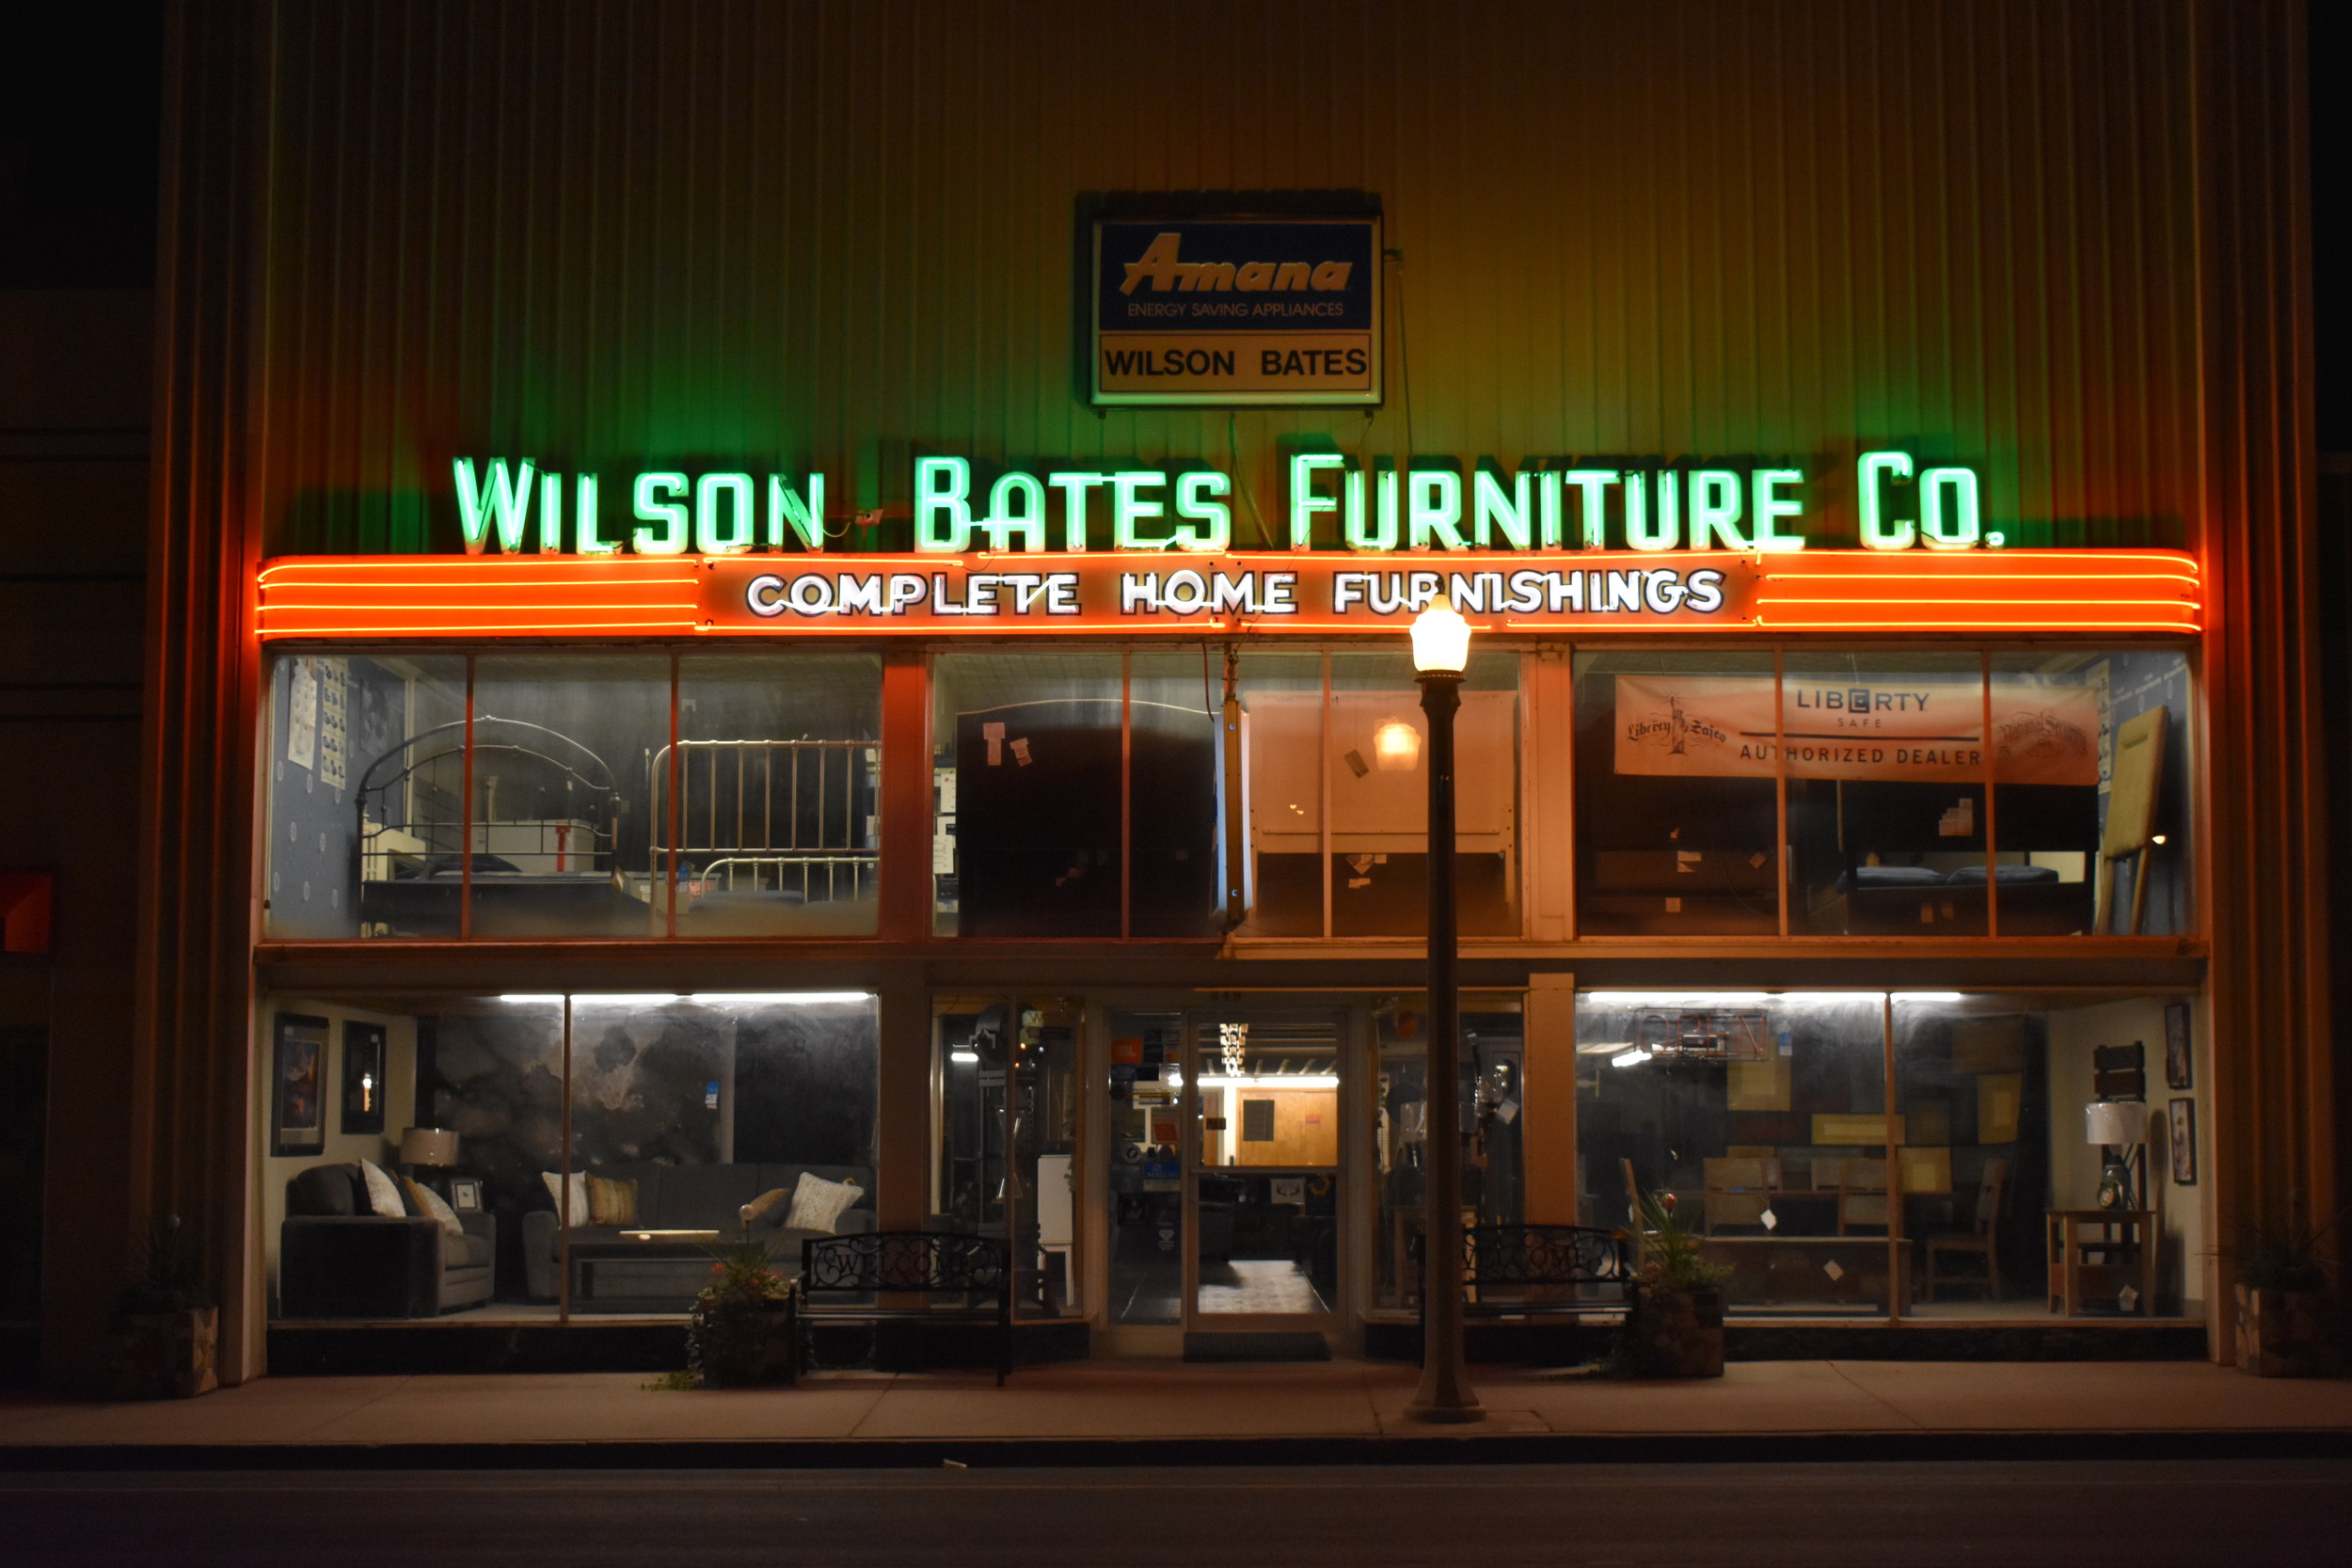 Wilson Bates Furniture Co wall mounted sign, Ely, Nevada